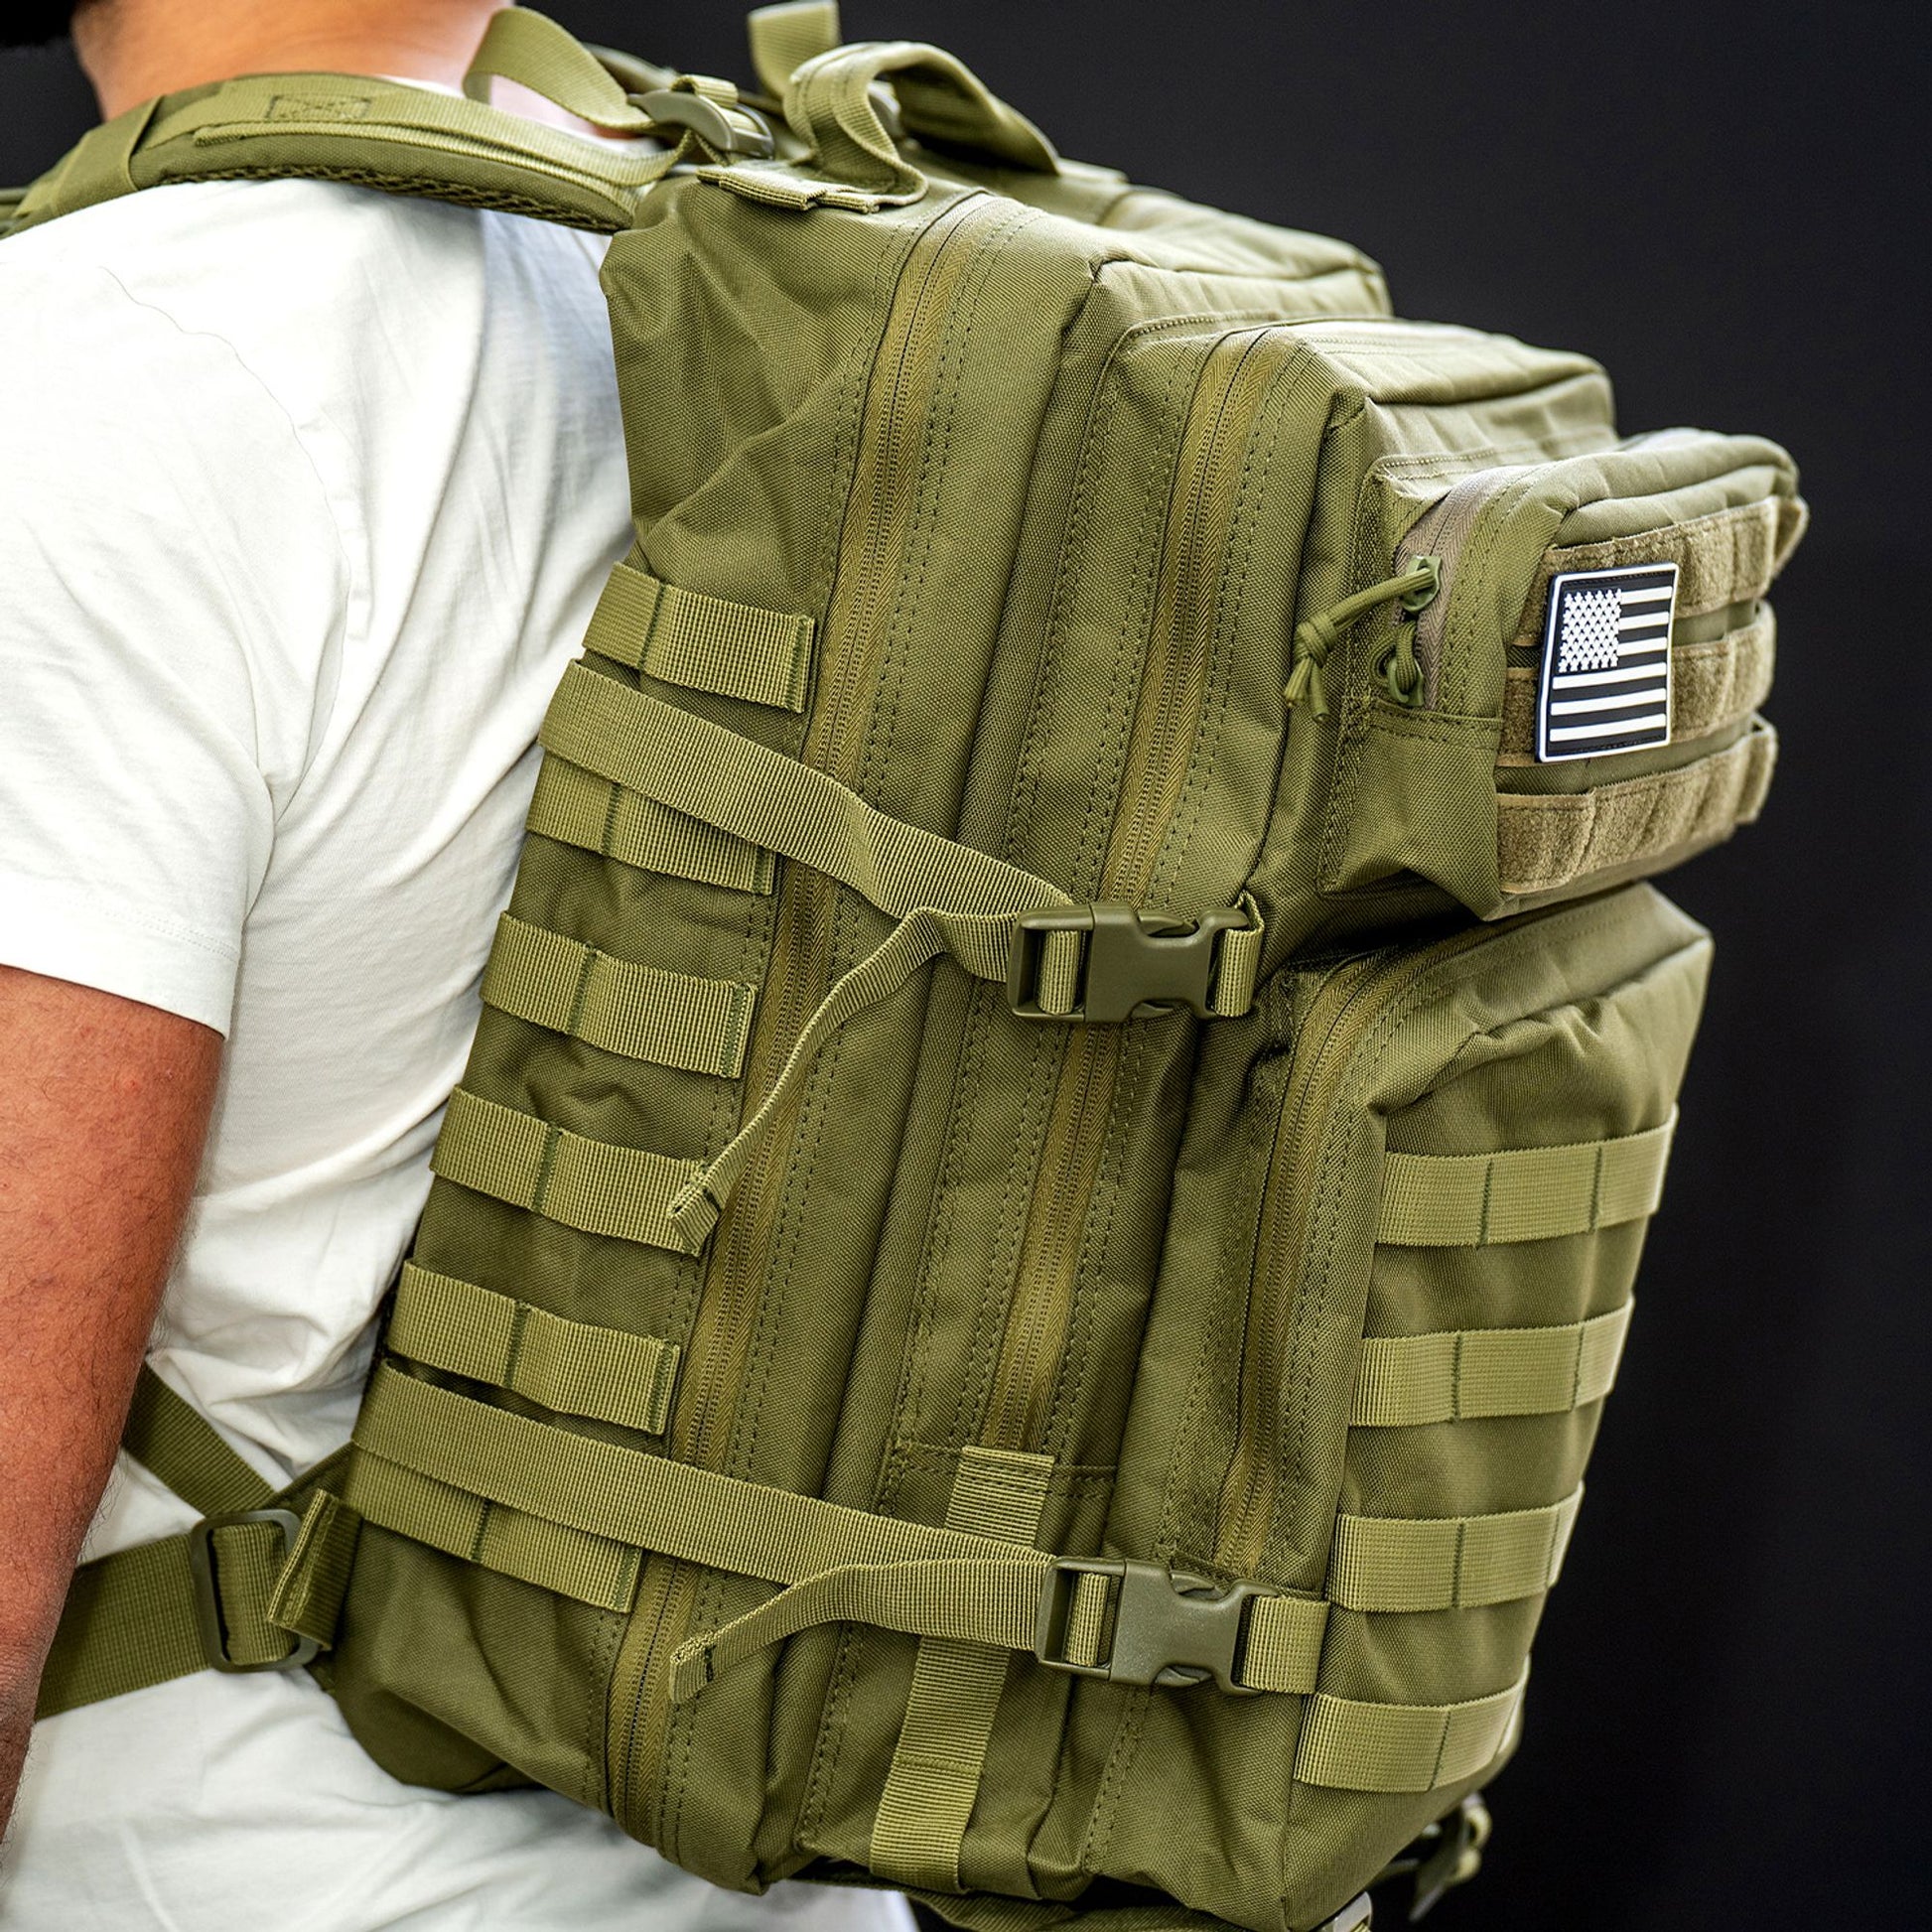 side view of the green tactical backpack